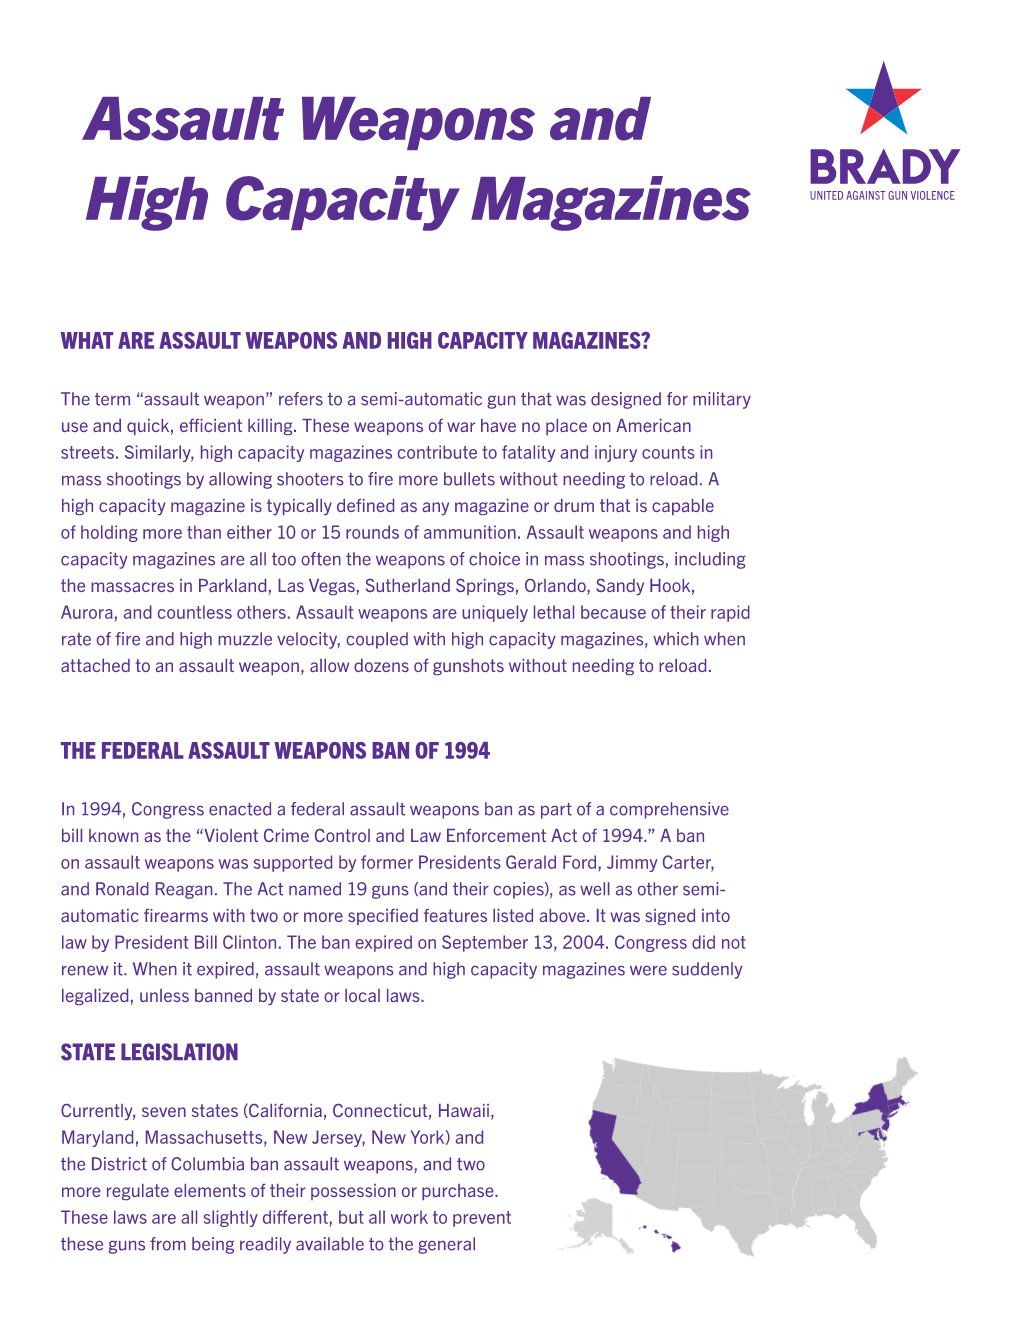 Assault Weapons and High Capacity Magazines